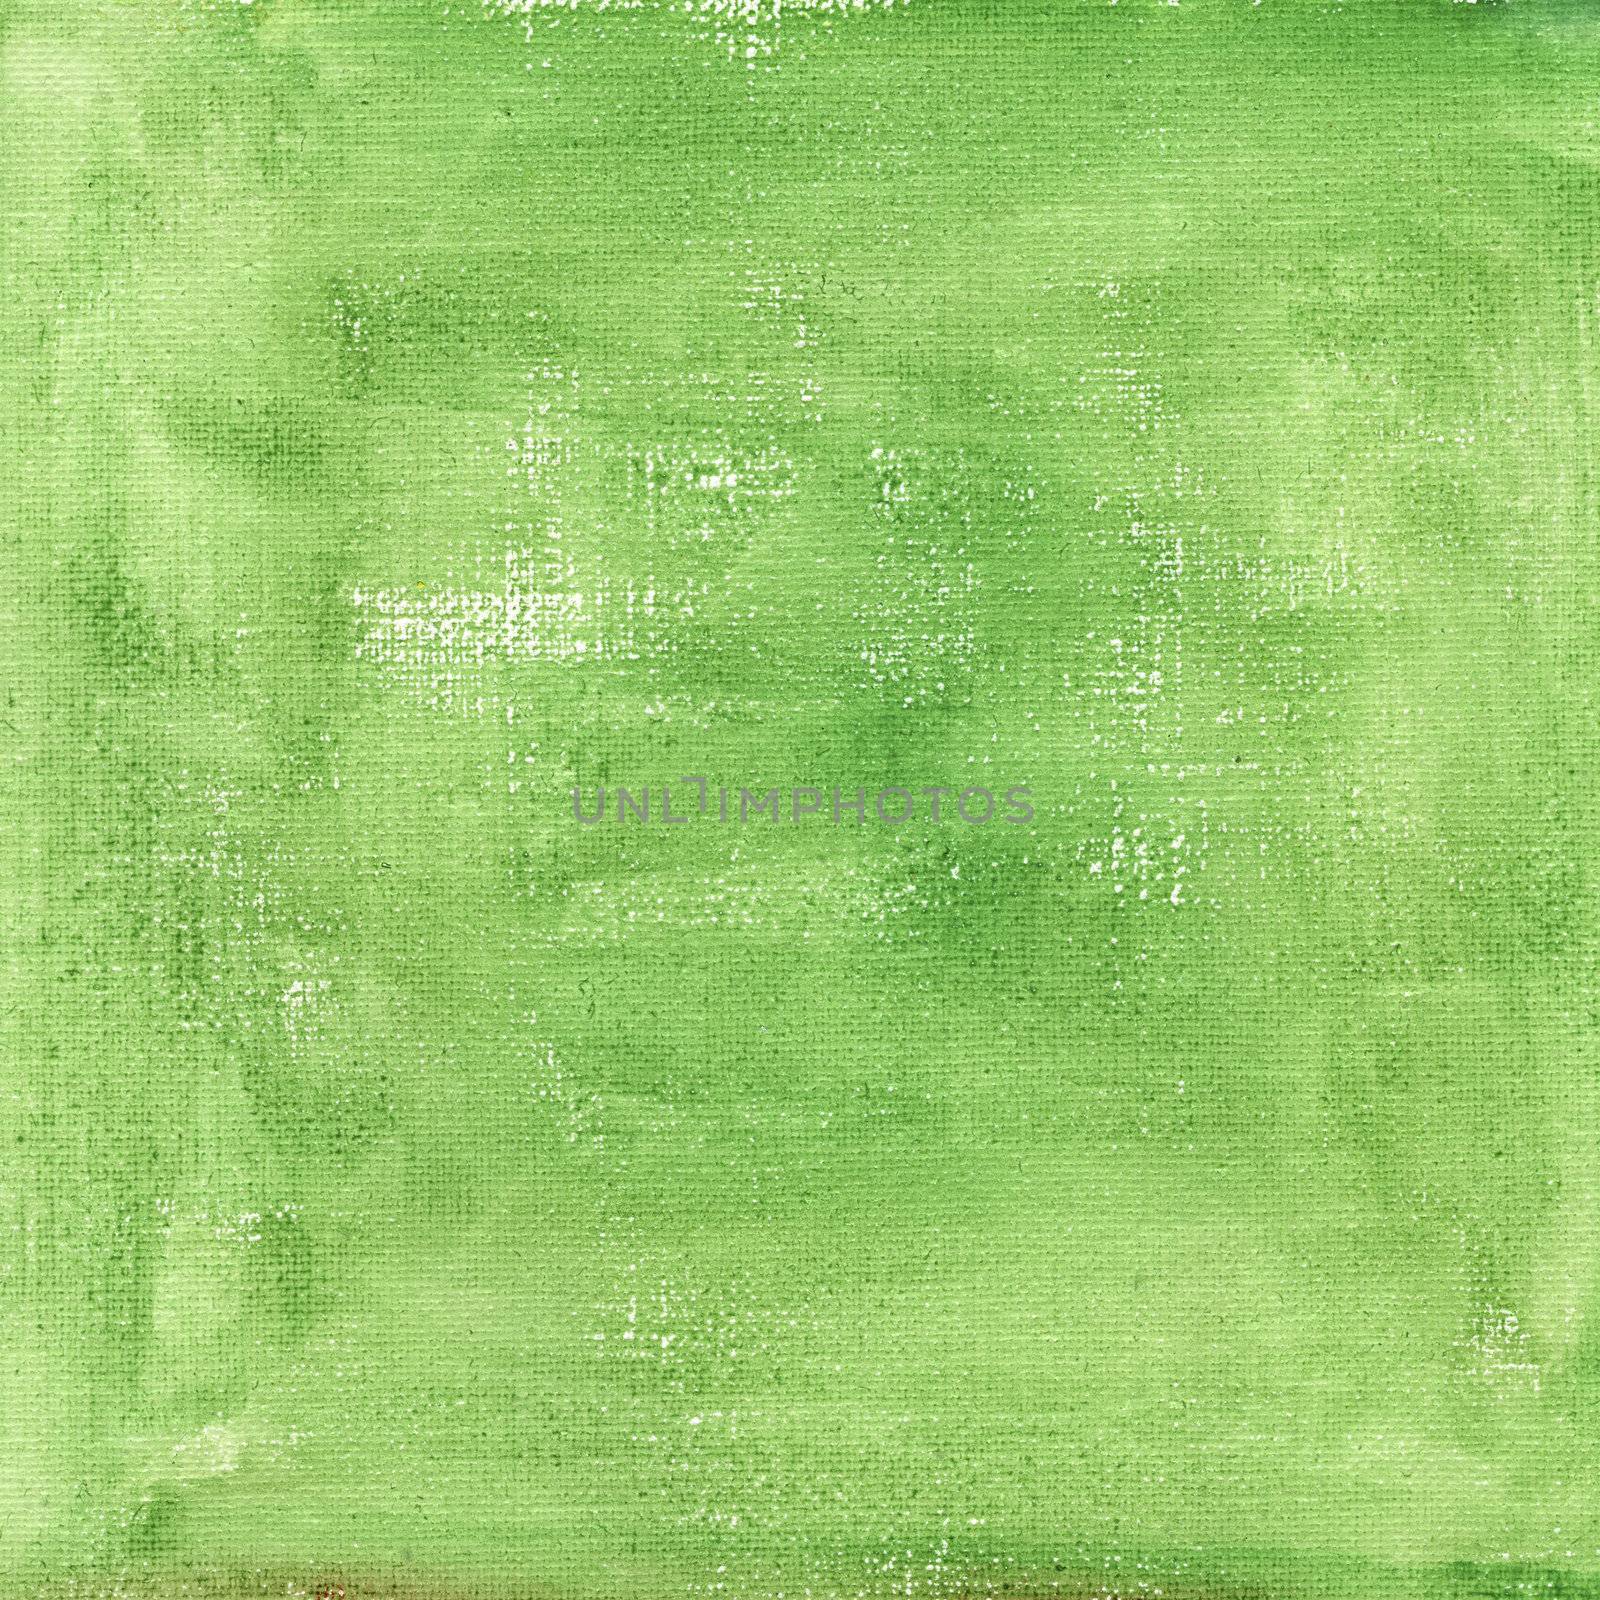 green watercolor abstract on white cotton artist canvas, self made by photographer